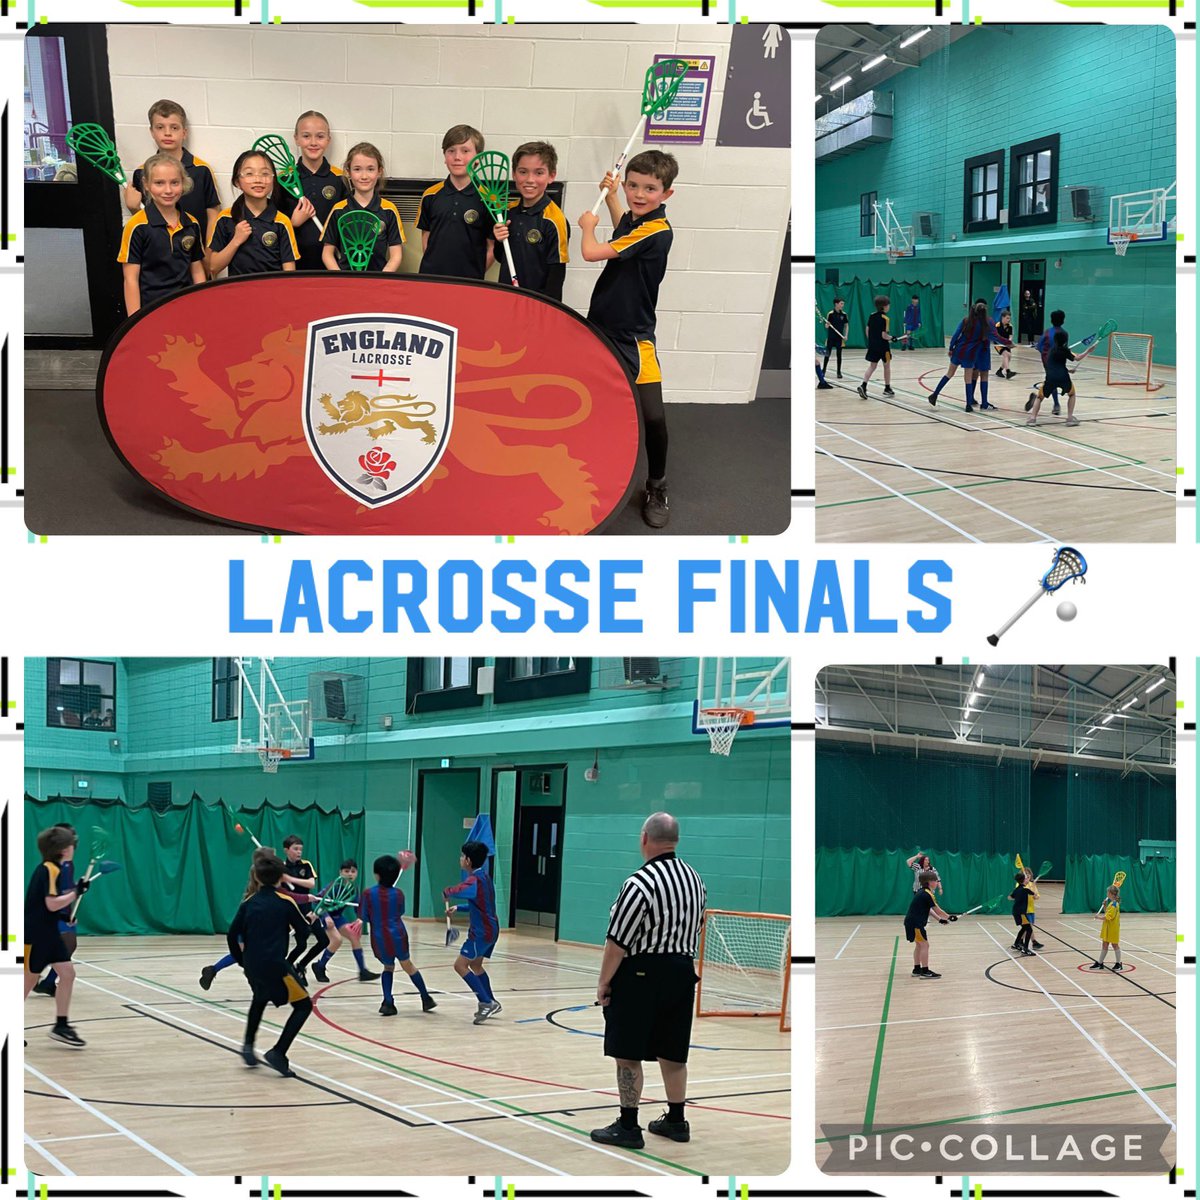 Well done to our fantastic Lacrosse team who made it to the quarter finals of the Greater Manchester Lacrosse Finals today! Fantastic effort from every player! #play #Lacrosse #proud #Togetherweareateam 🔵